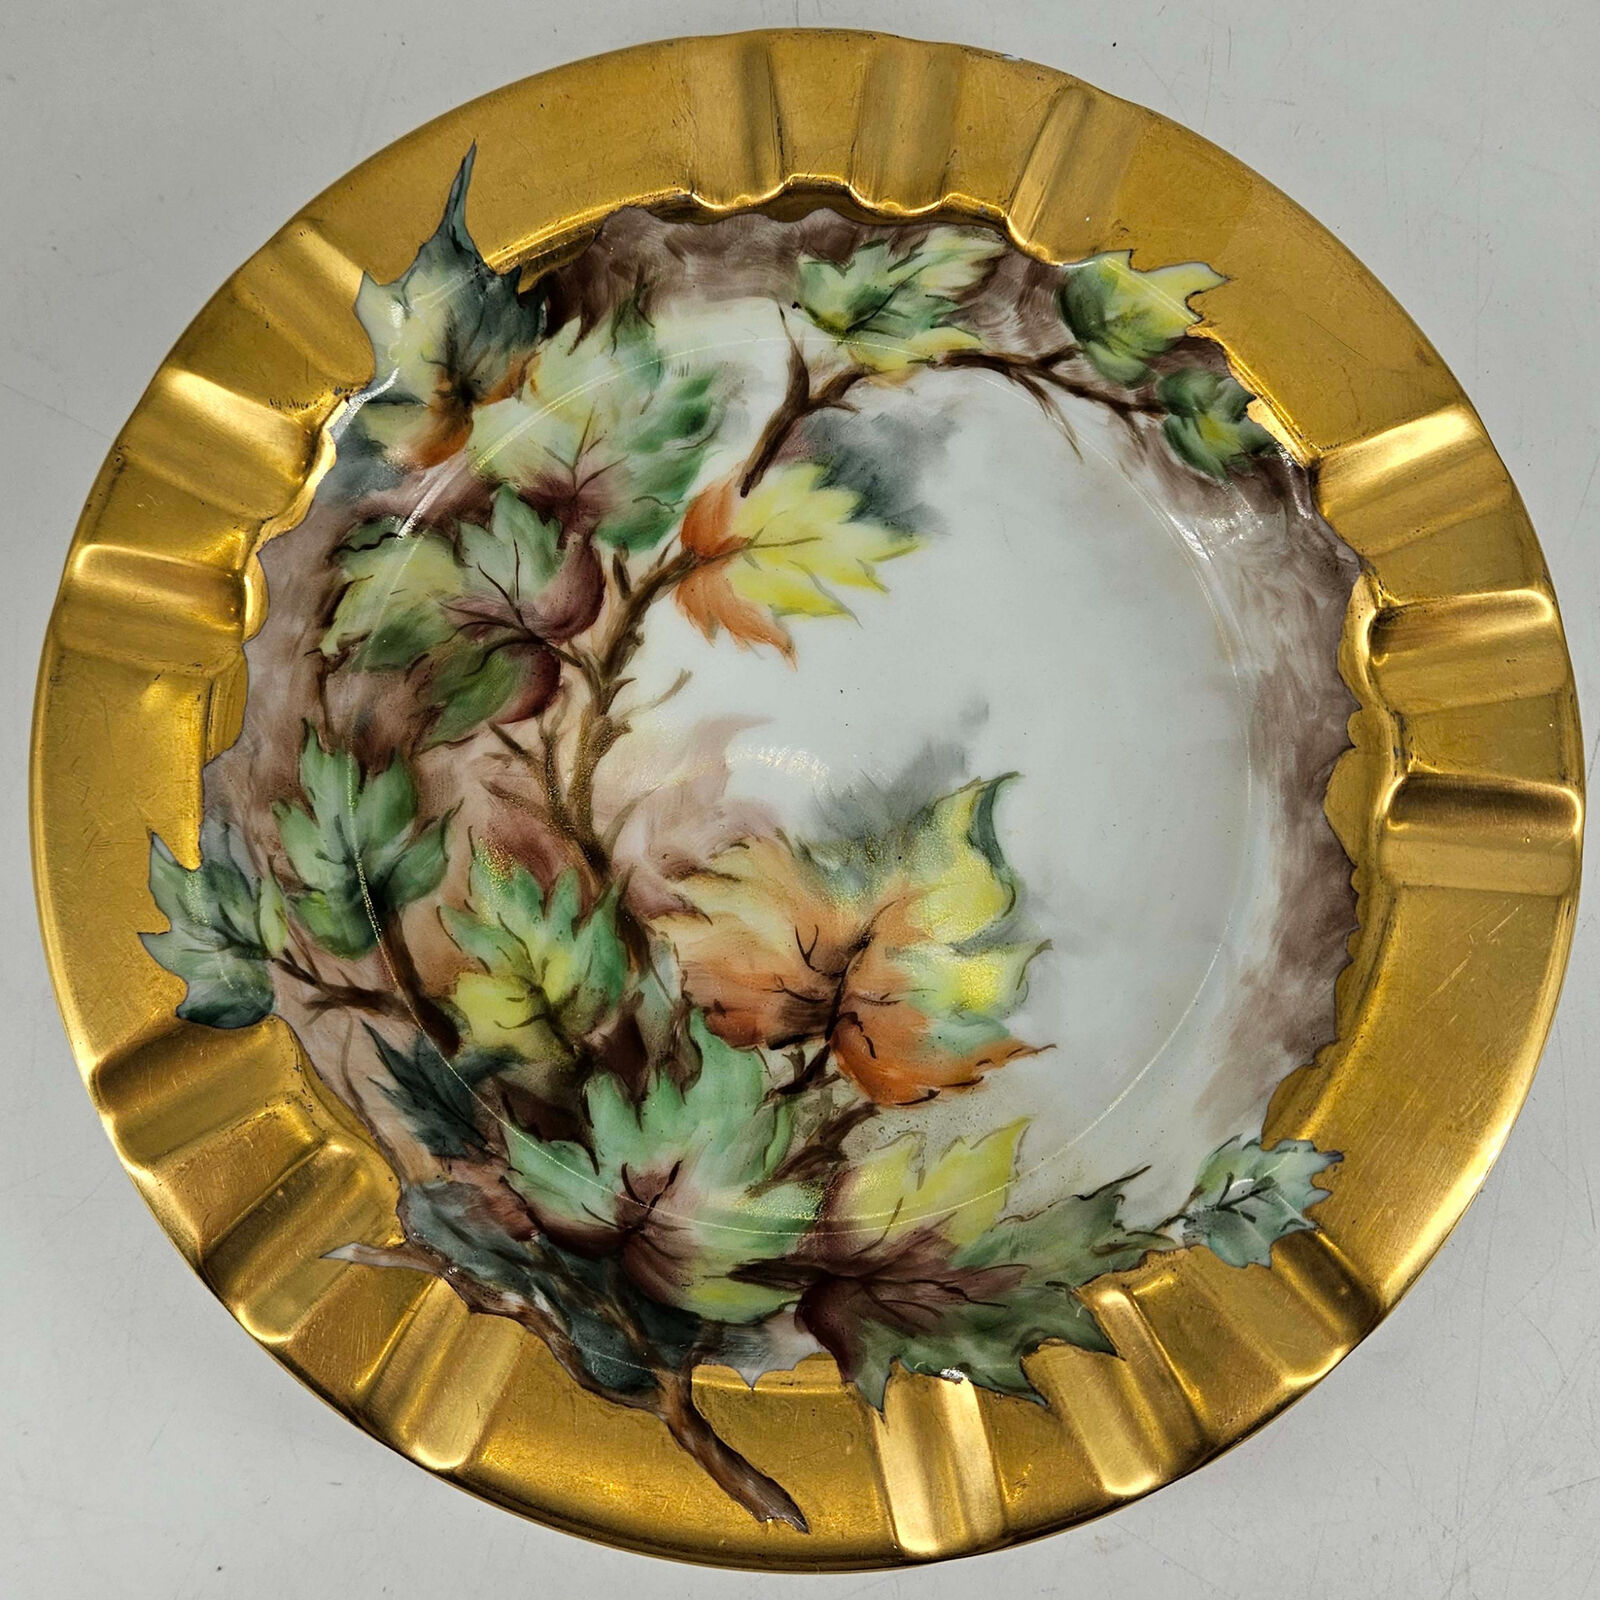 Vintage Hand Painted Gilded floral decorative bowl dish plate signed 1960